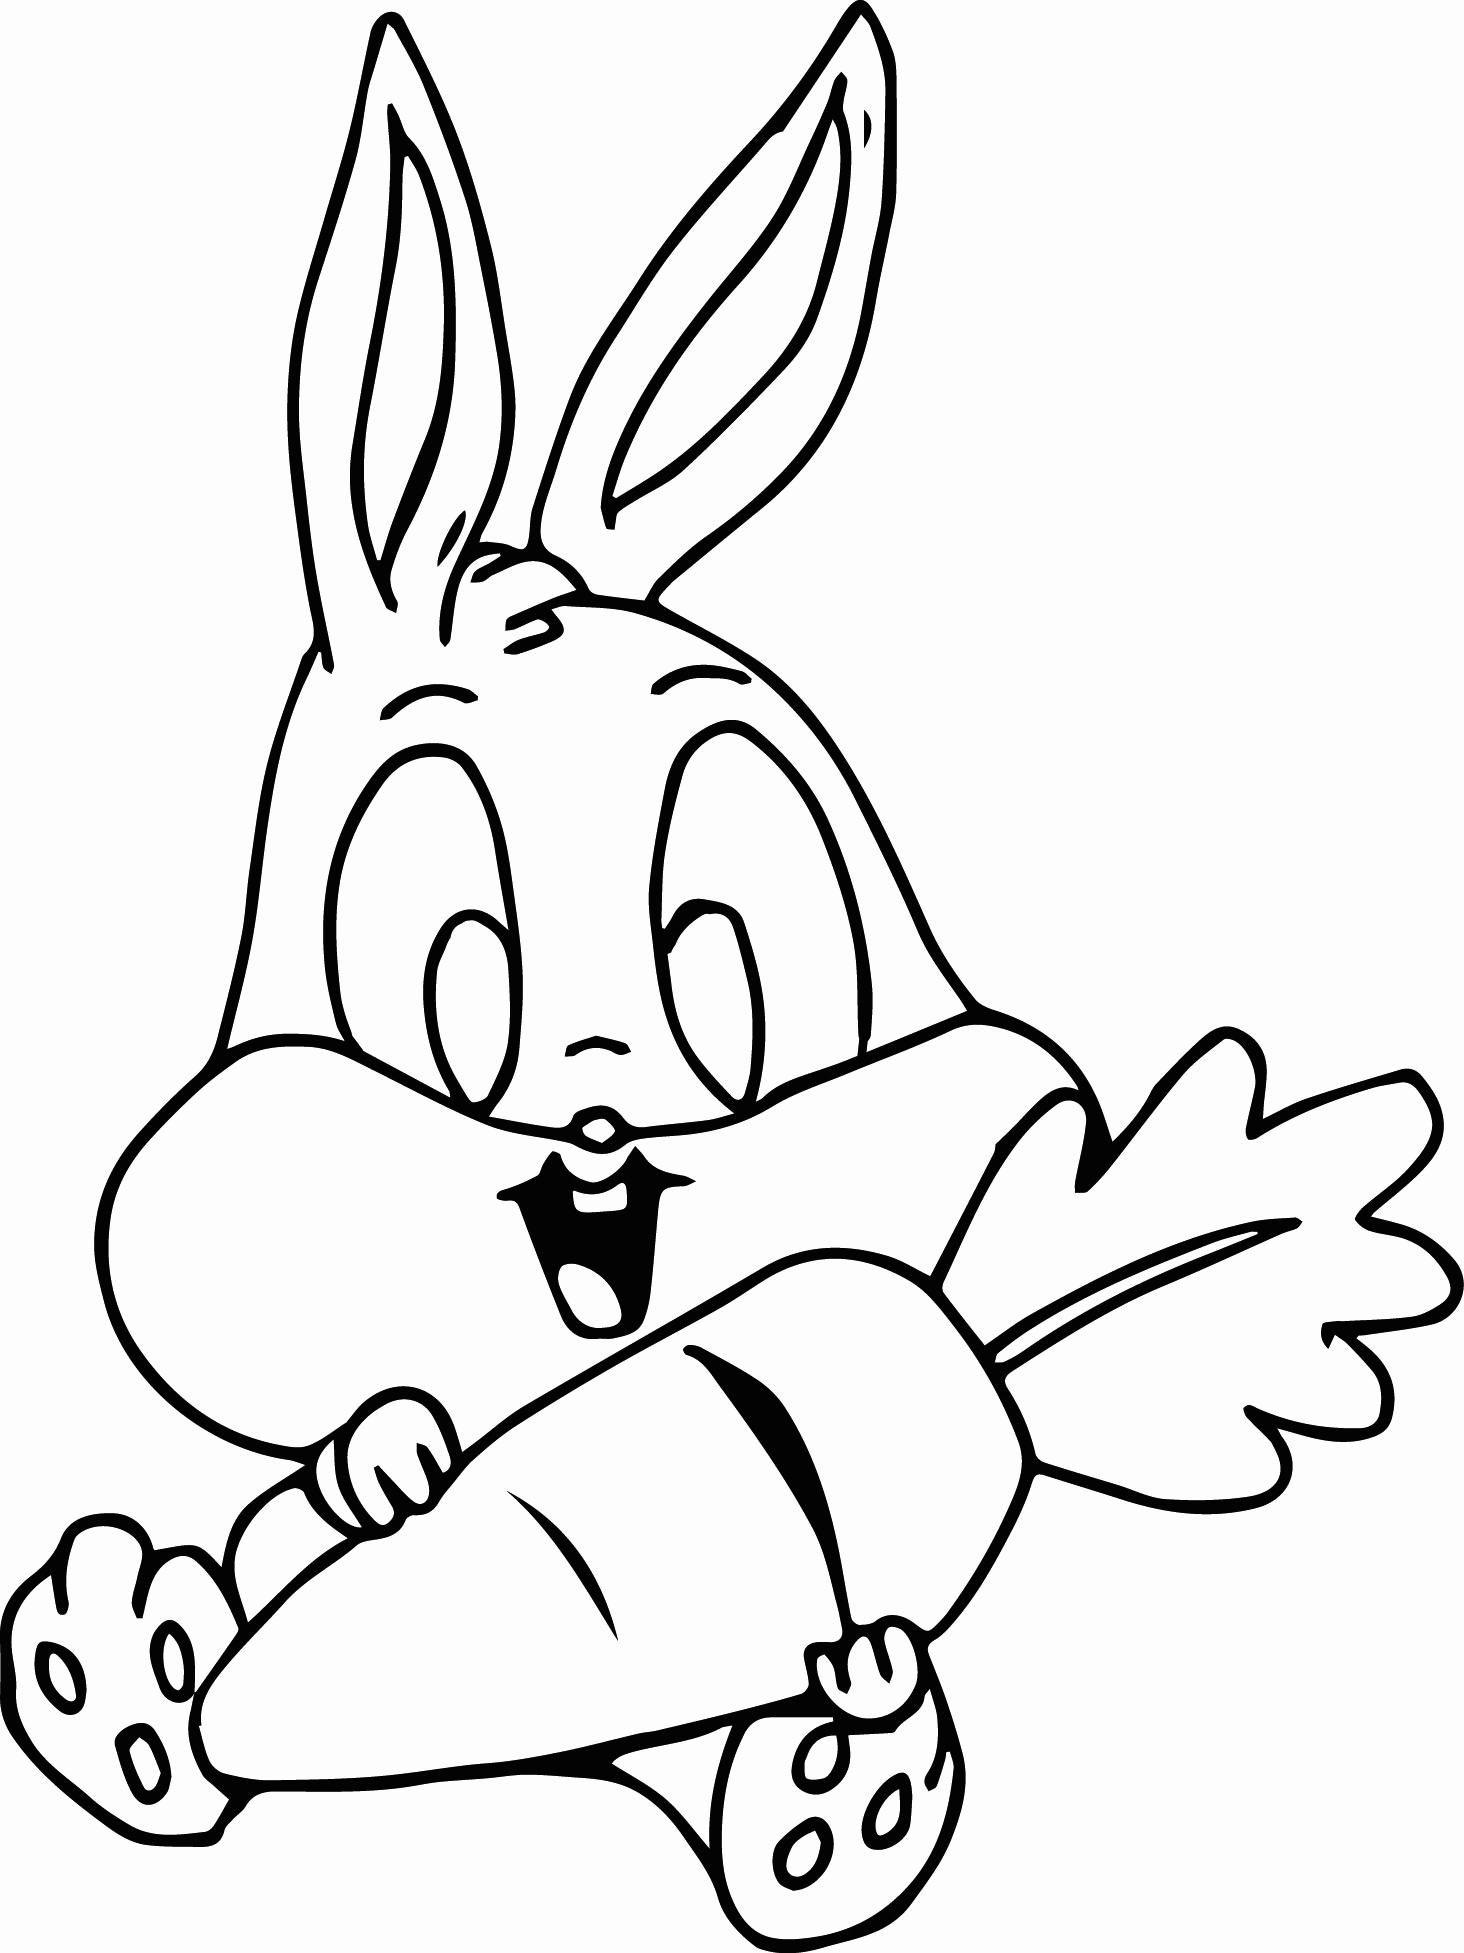 Carrot Coloring Pages Vegetables Food Baby Bugs and Carrot Printable 2021 523 Coloring4free